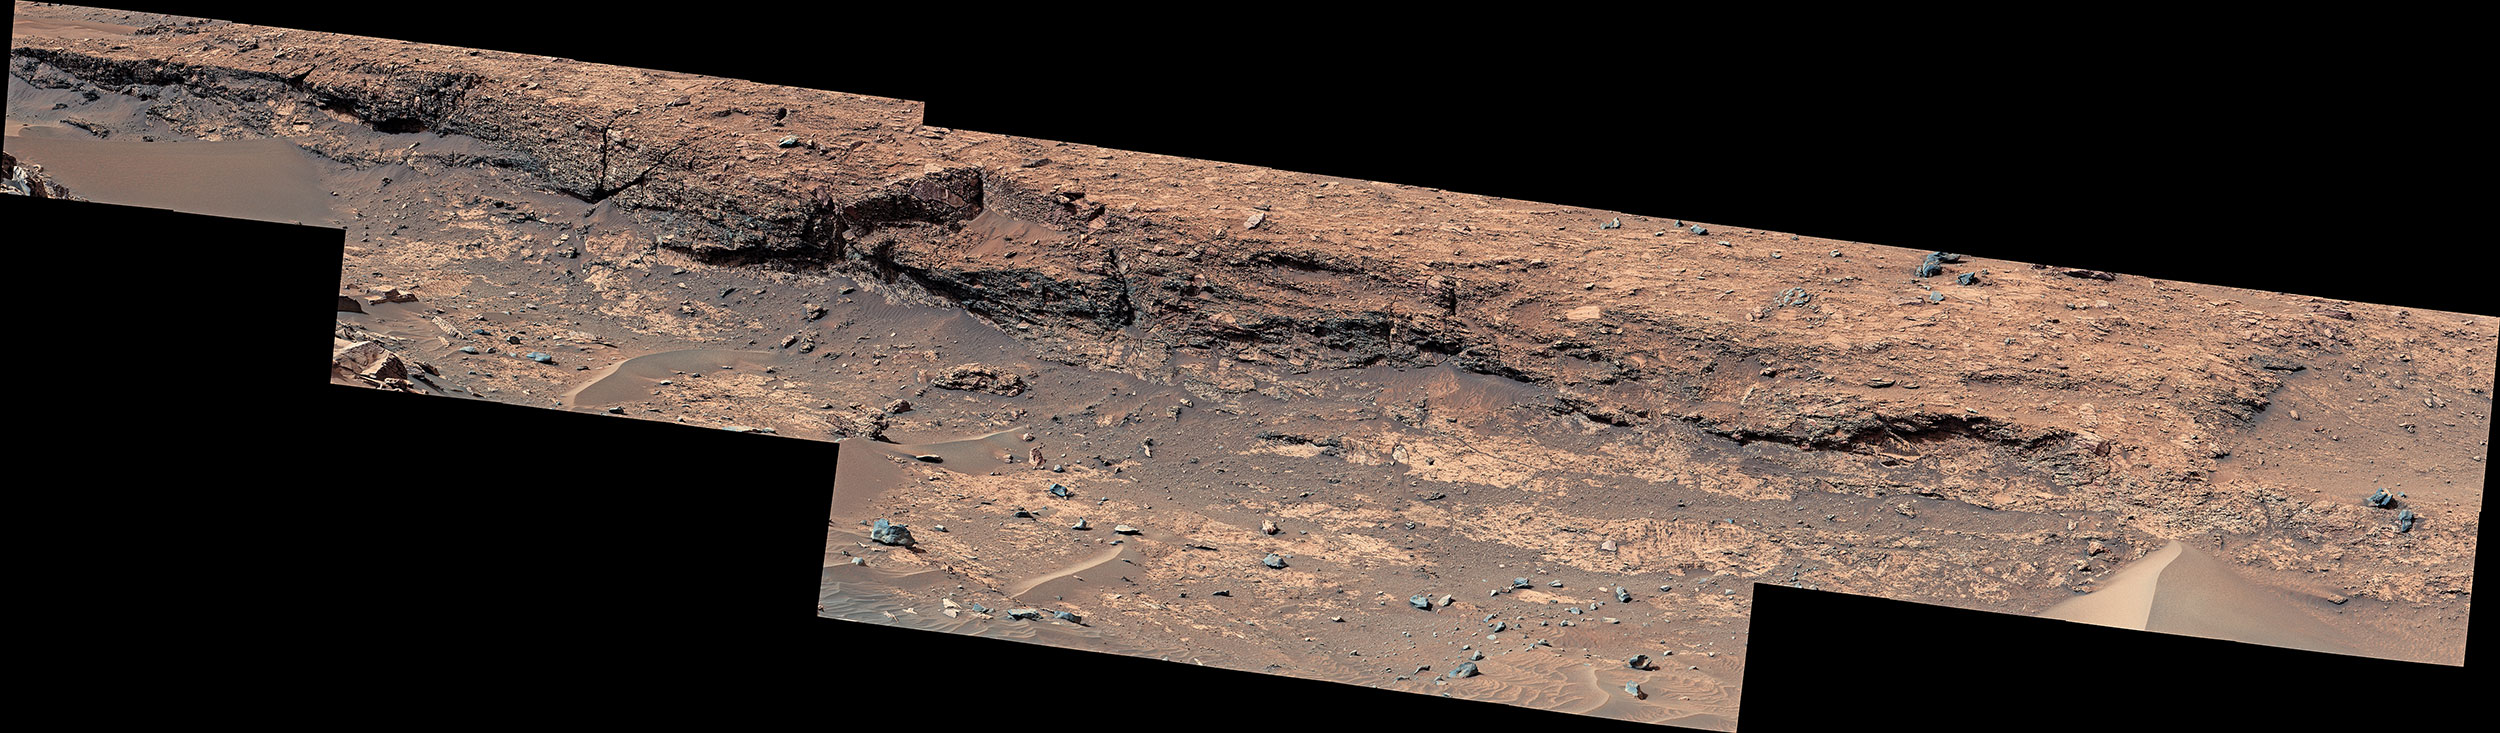 NASA’s Curiosity Mars rover used its Mast Camera, or Mastcam, to capture this detailed view of jagged rocks and sediment exposed along the side of a mound called “Fascination Turret.” Made up of 32 individual images that were stitched together after being sent back to Earth, this panorama was taken on March 24, 2024, the 4,135th Martian day, or sol, of the mission.